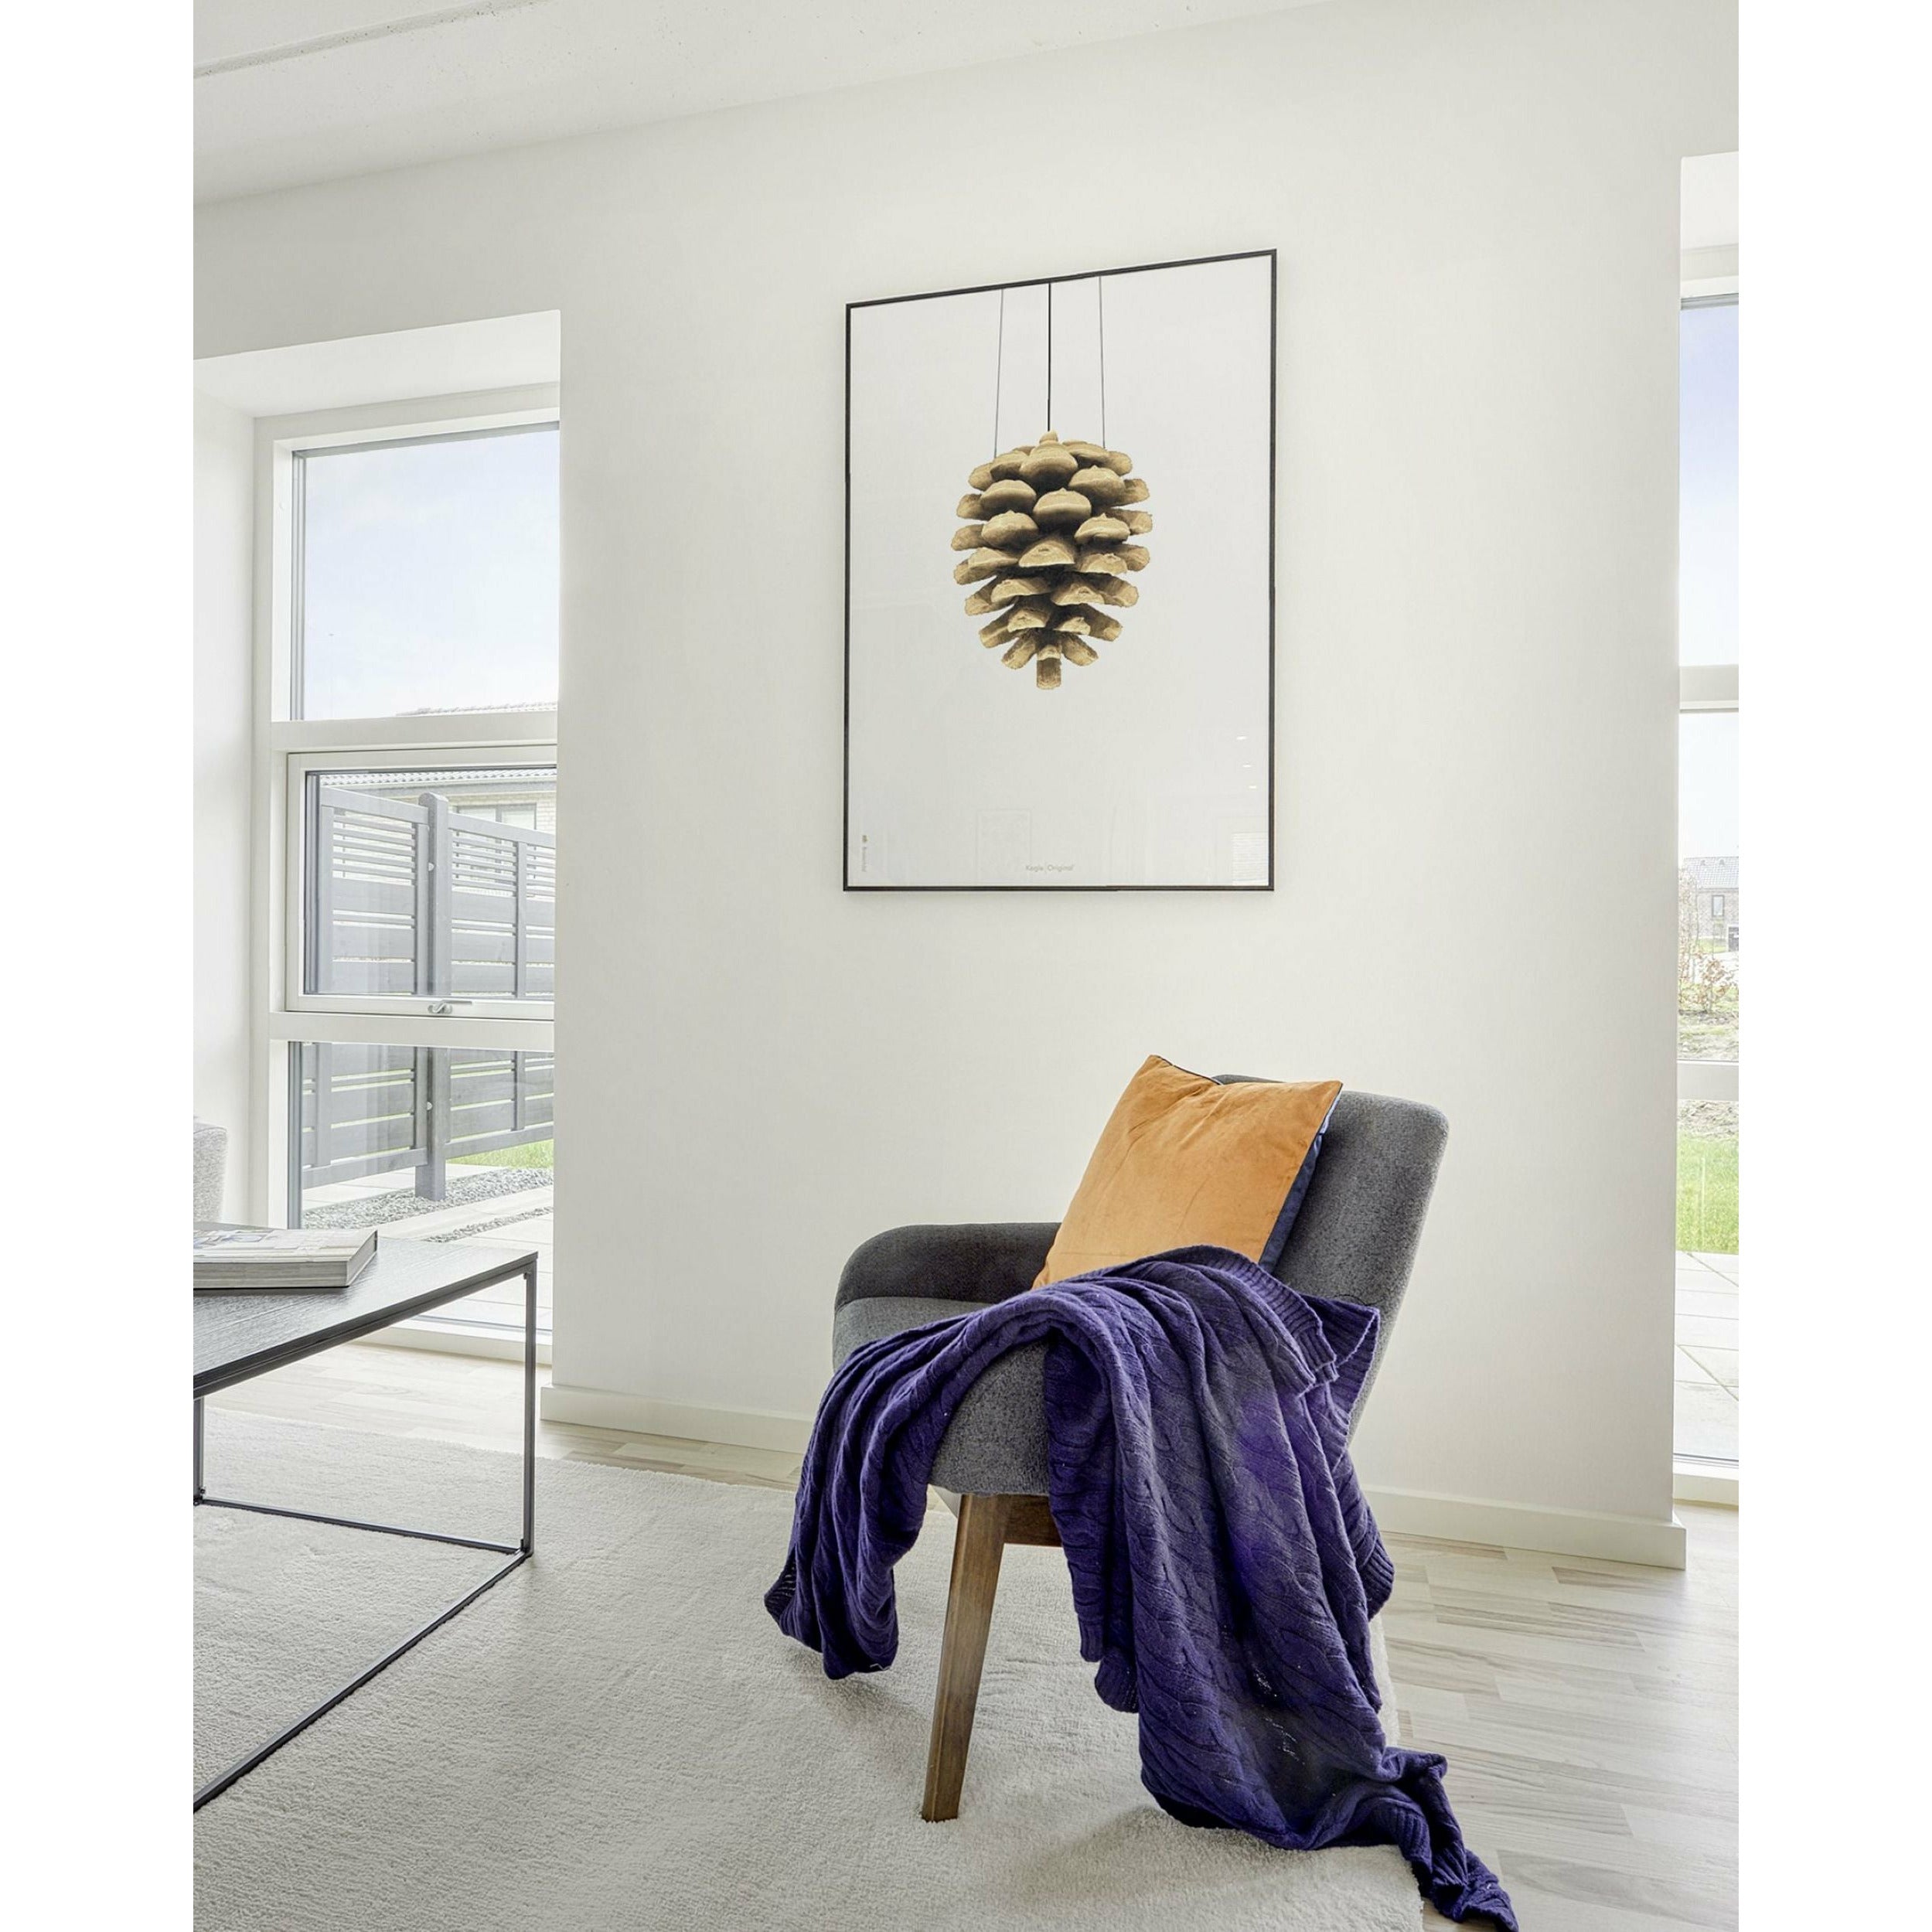 Brainchild Pine Cone Classic Poster, Frame Made Of Light Wood 70x100 Cm, White Background